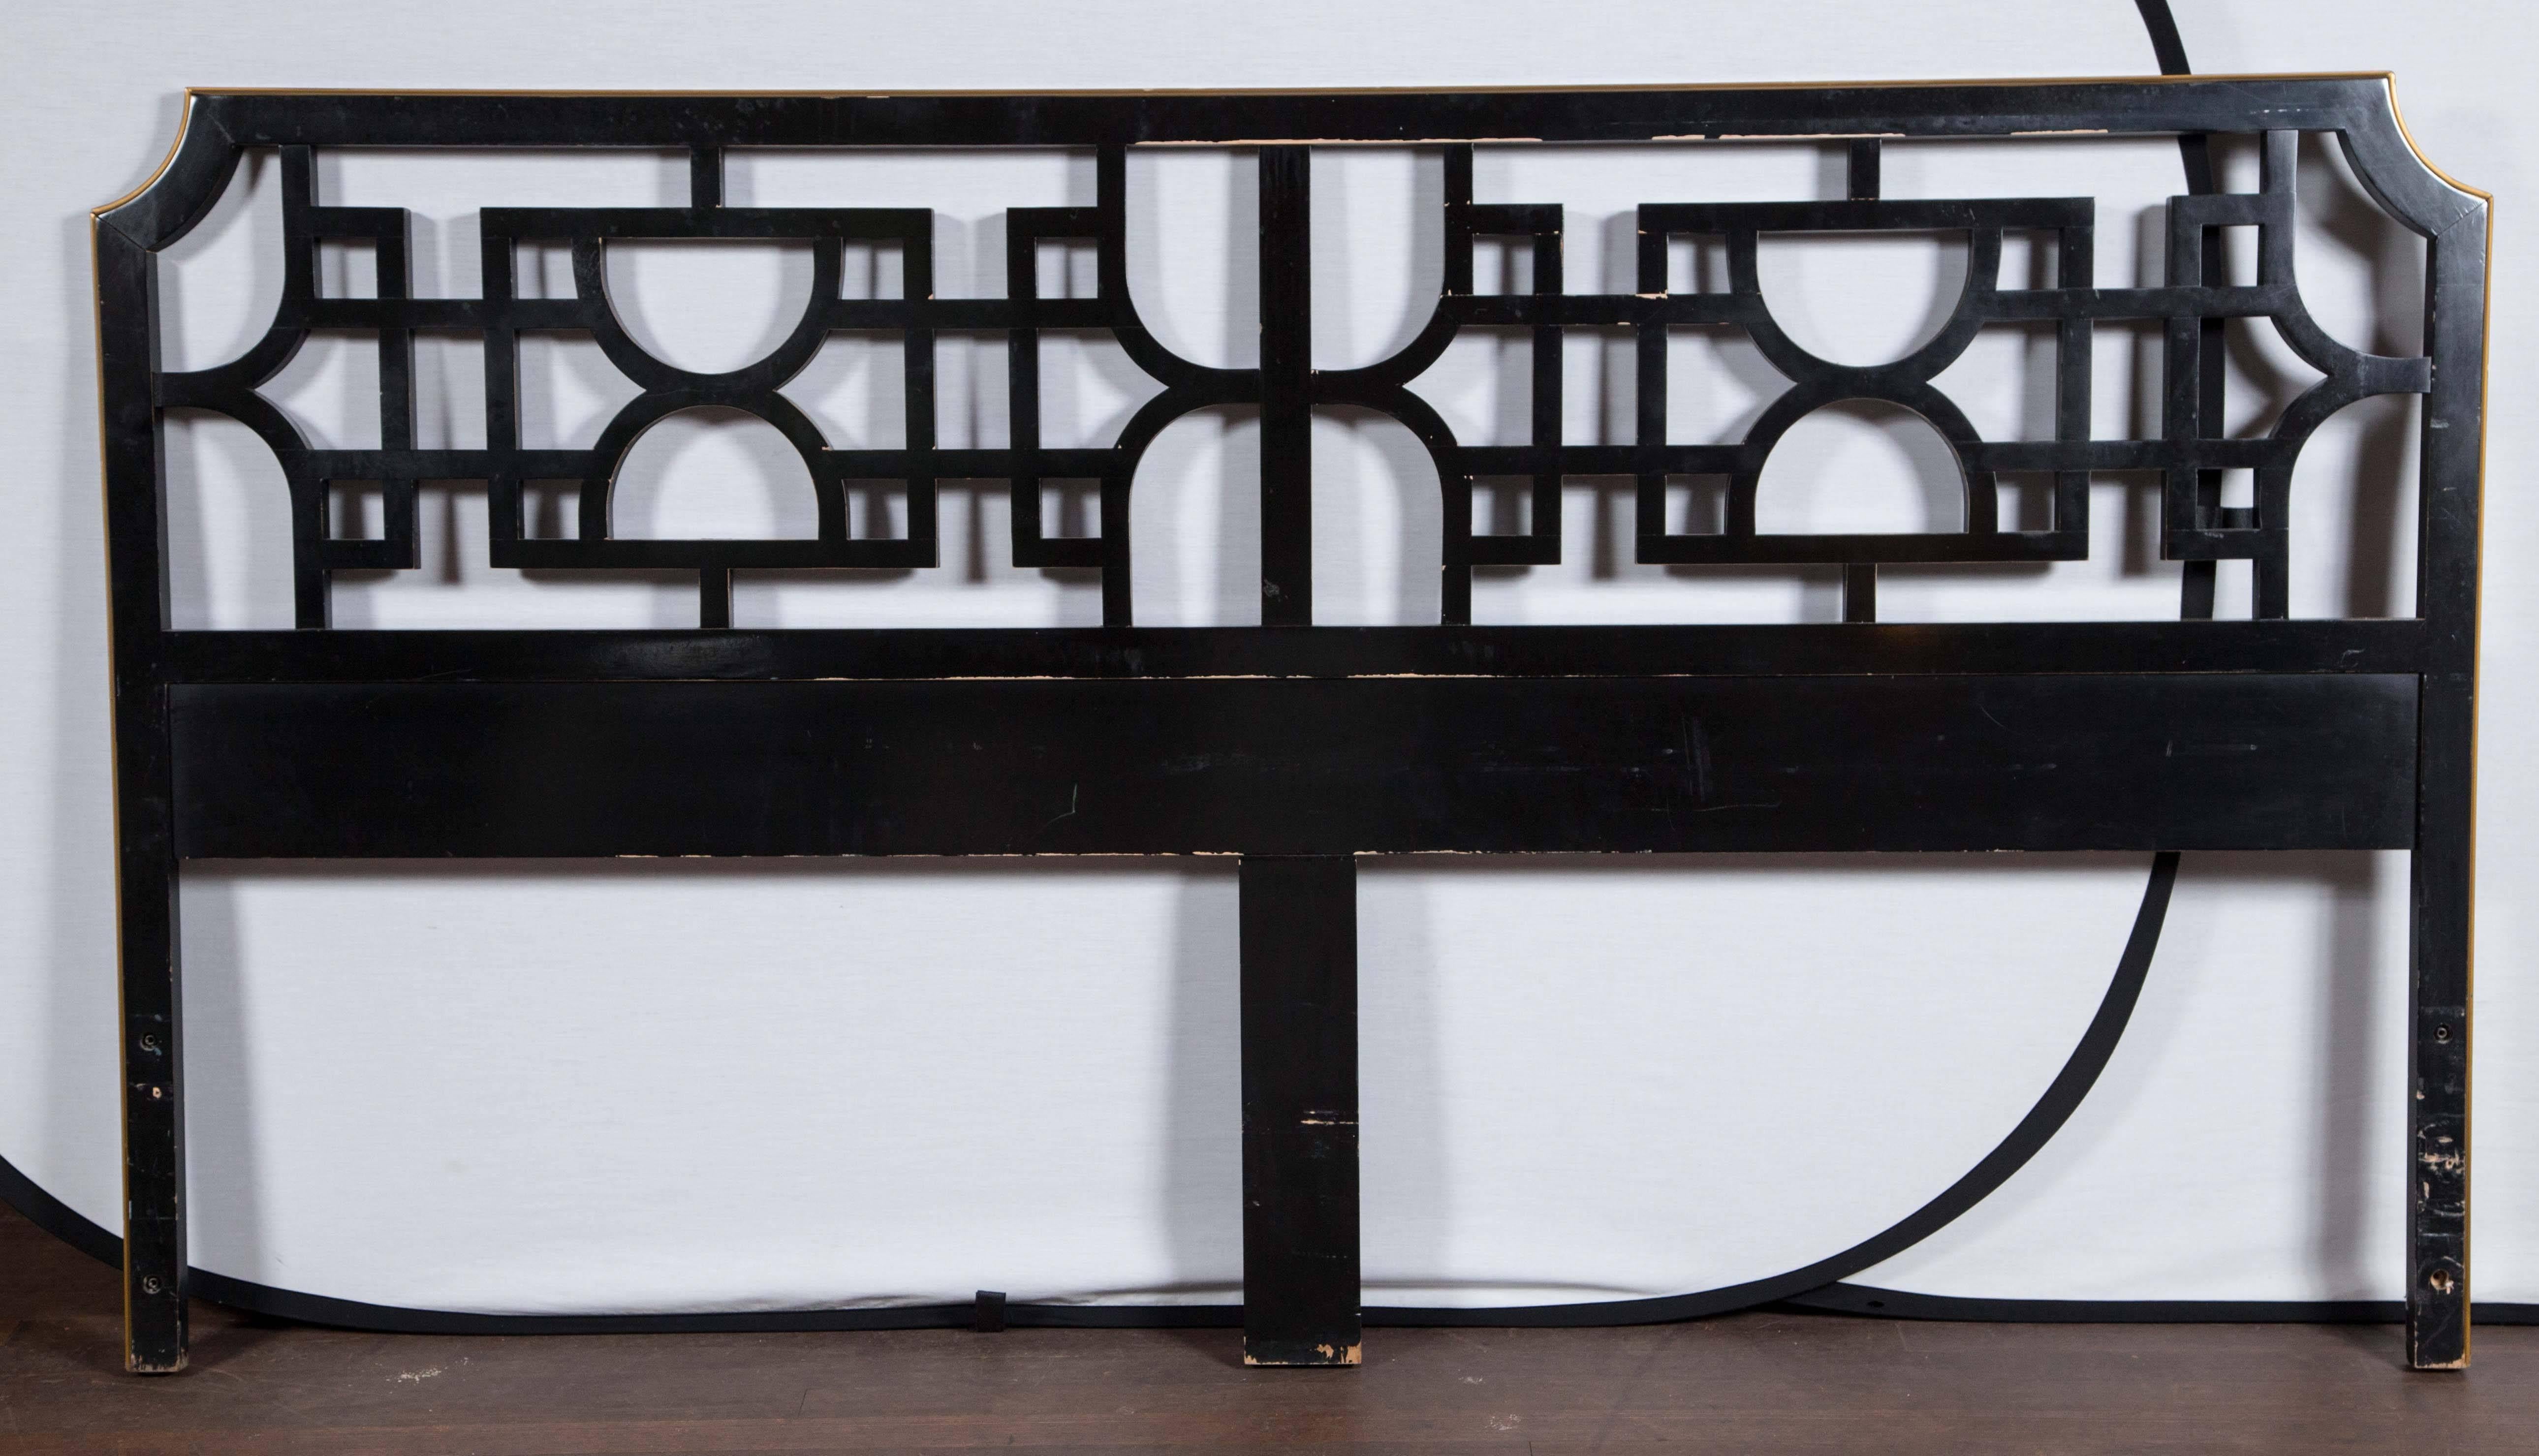 Black lacquer and gilt trim lattice, solid wood king-size headboard. Paint finish has wear, but a high quality and substantial piece.